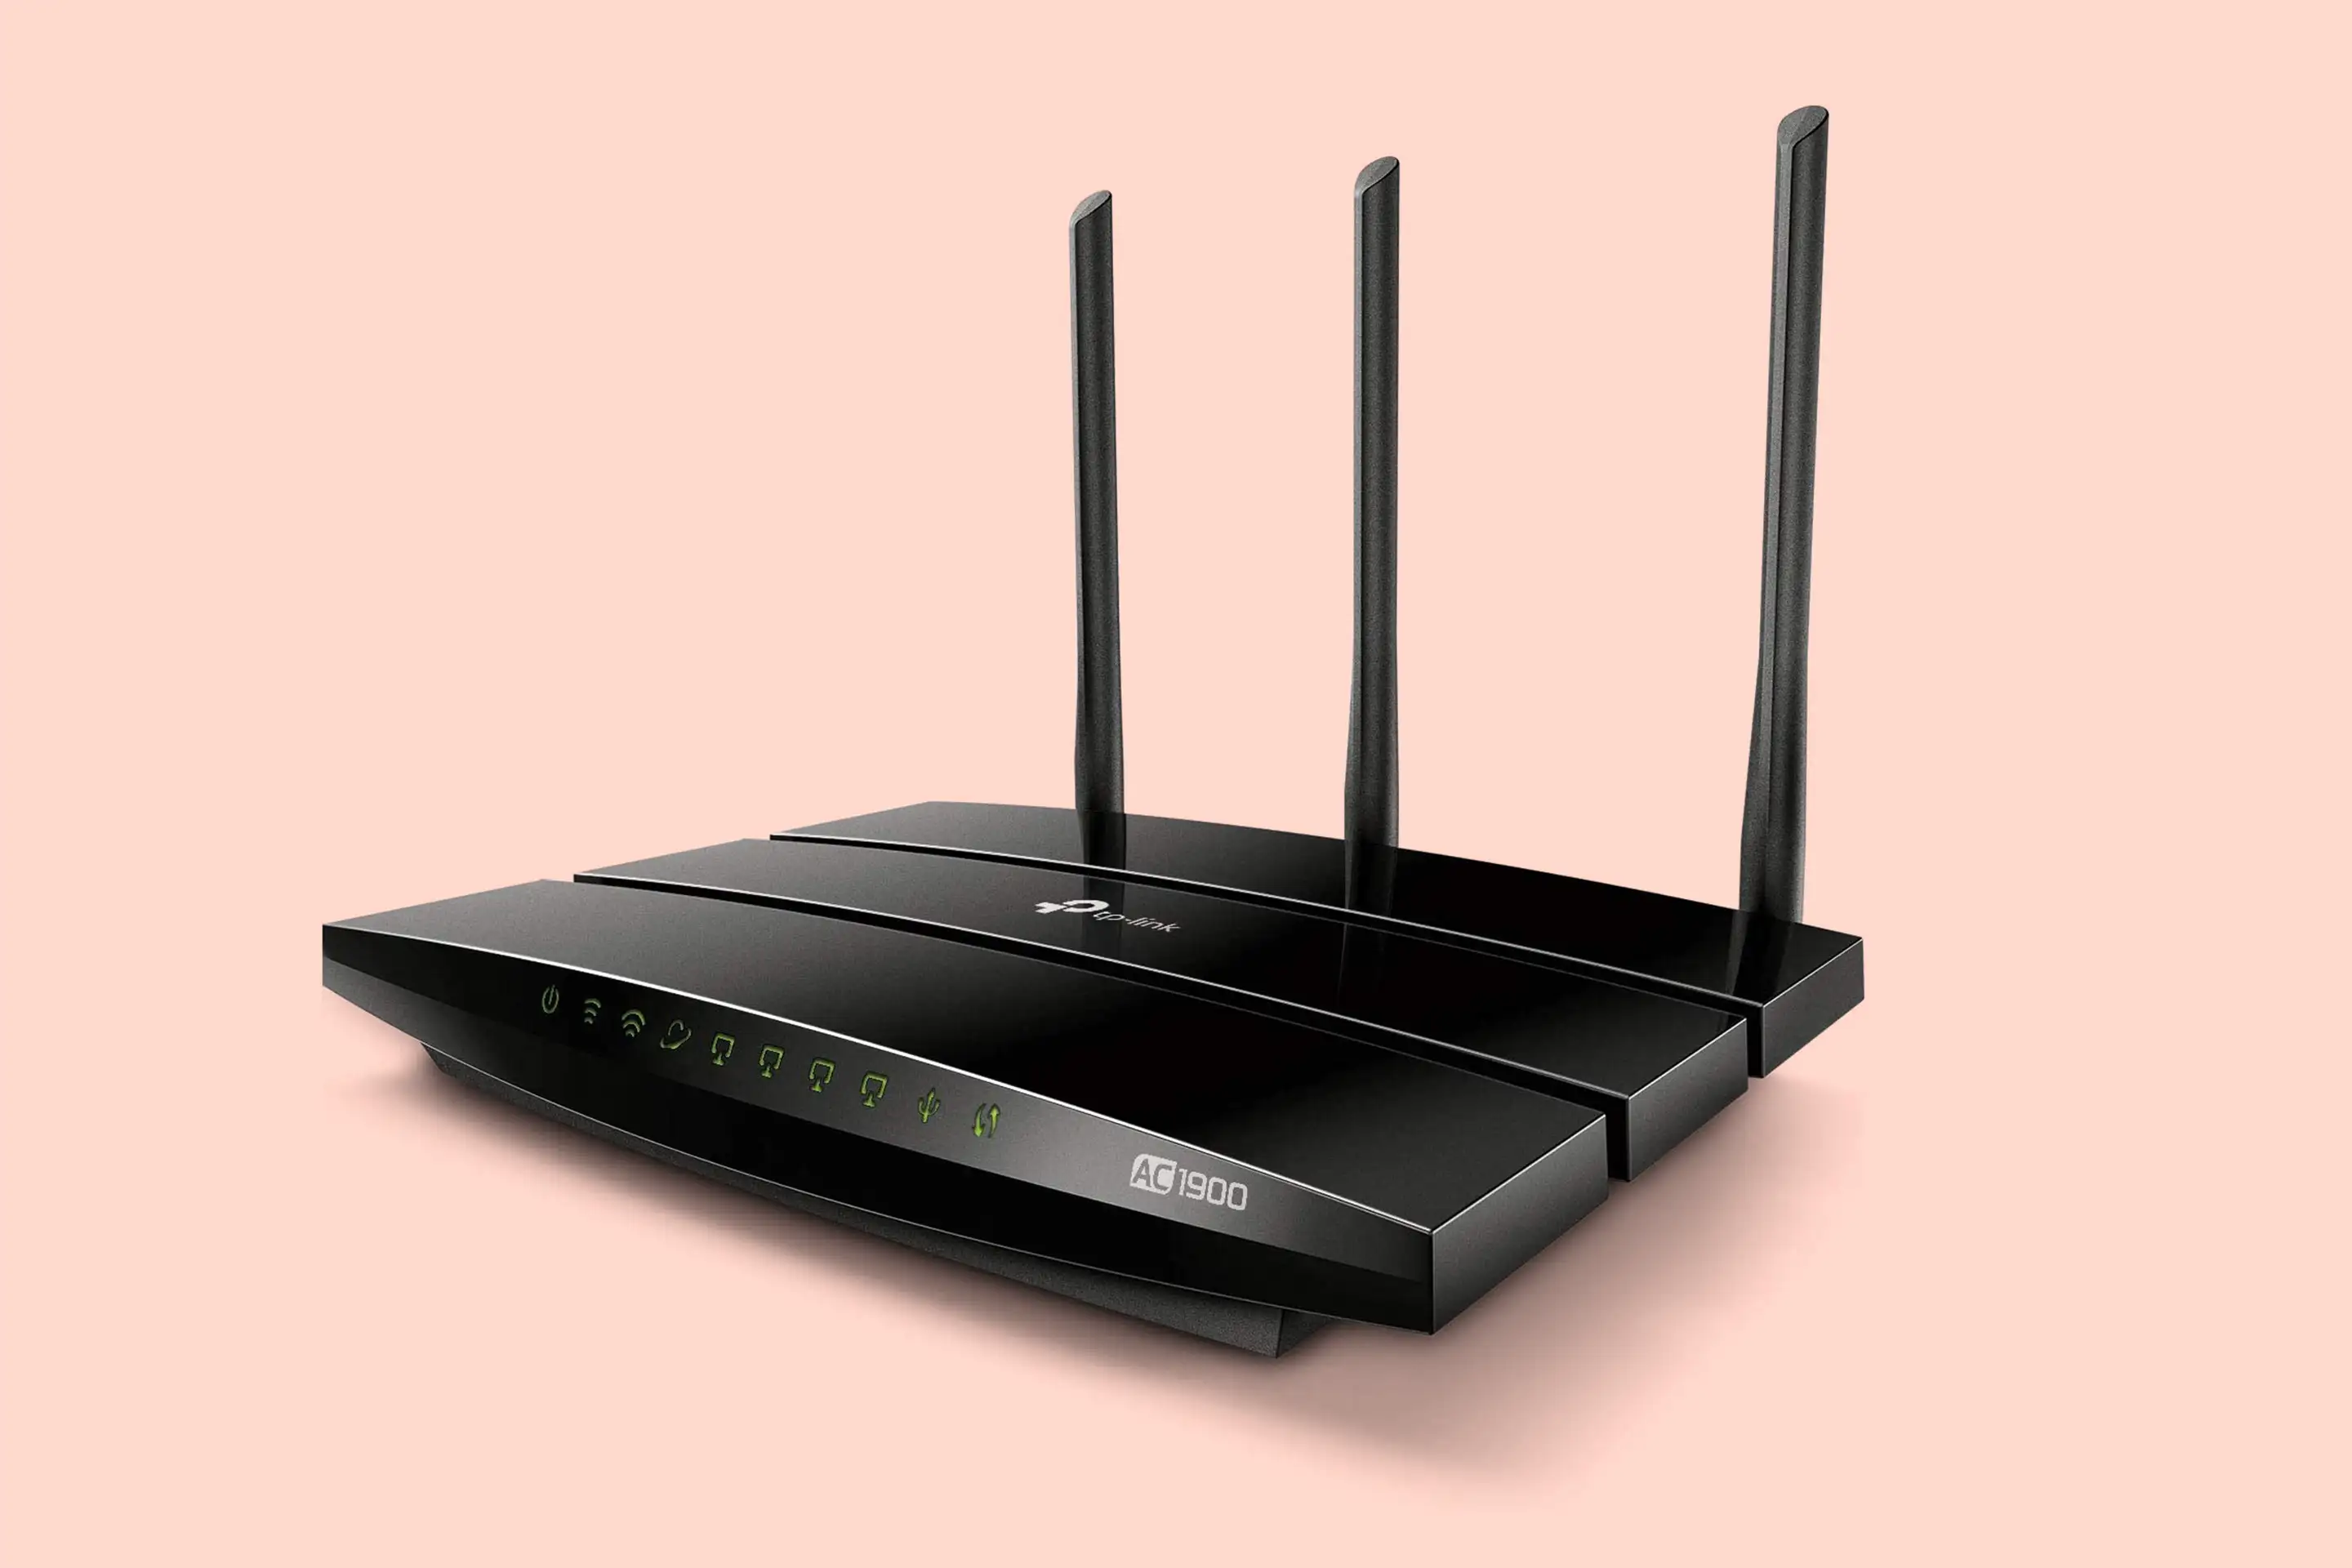 TP Link AC1900 Smart WiFi Router